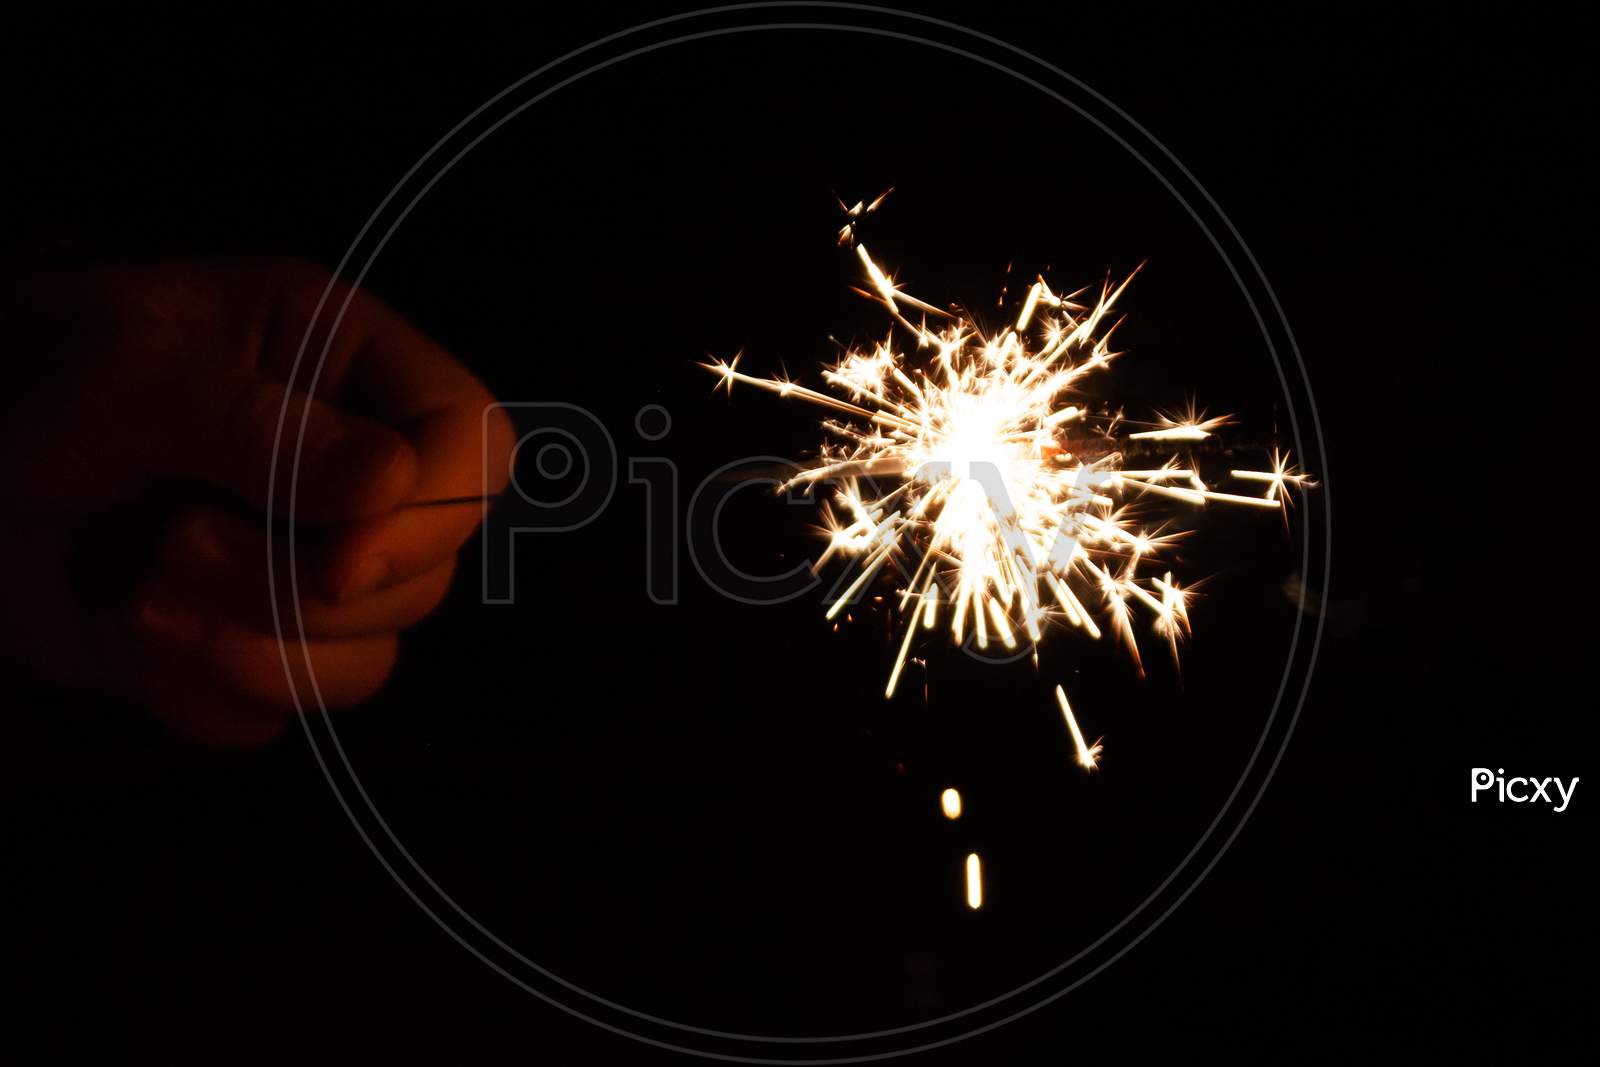 beautiful sparkler hold in the hand of a child during happy new year wishing on new years eve in the dark night with silver sparkles and a fiery glow in the night